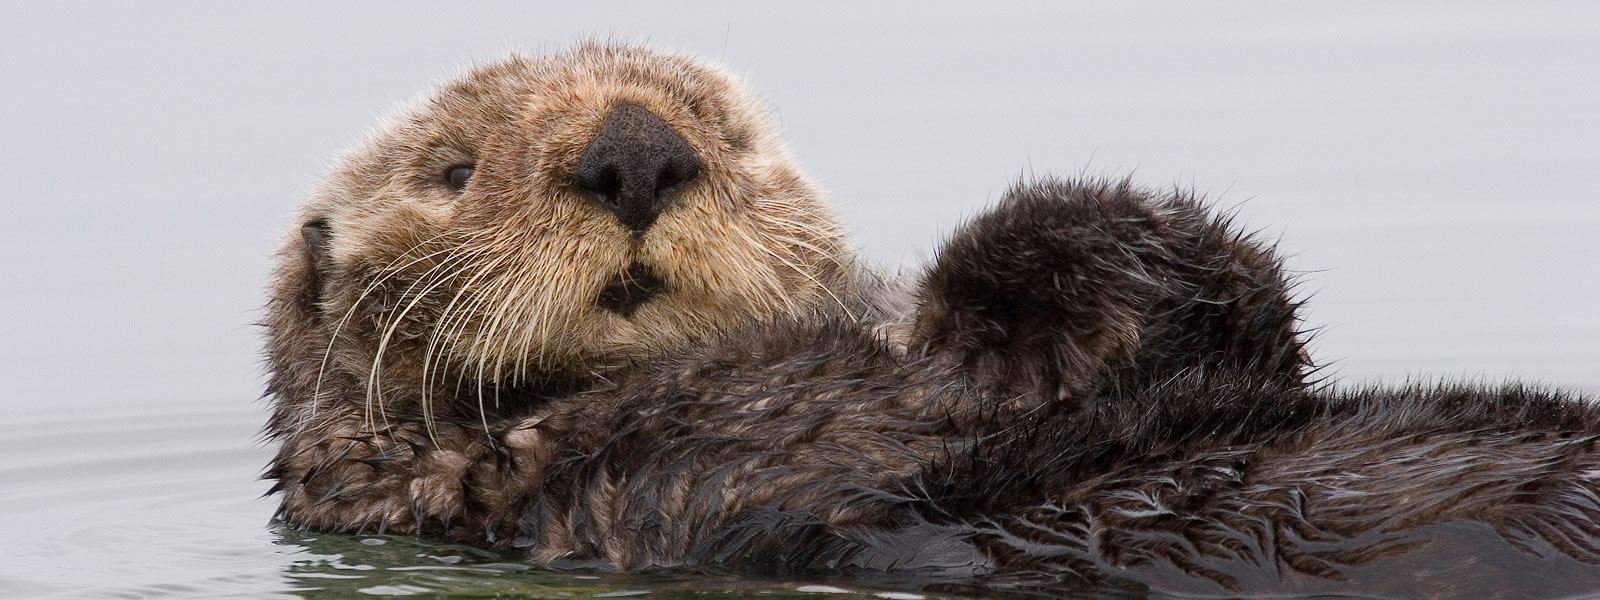 A Sea Otter Enhydra lutris floating on its back in water